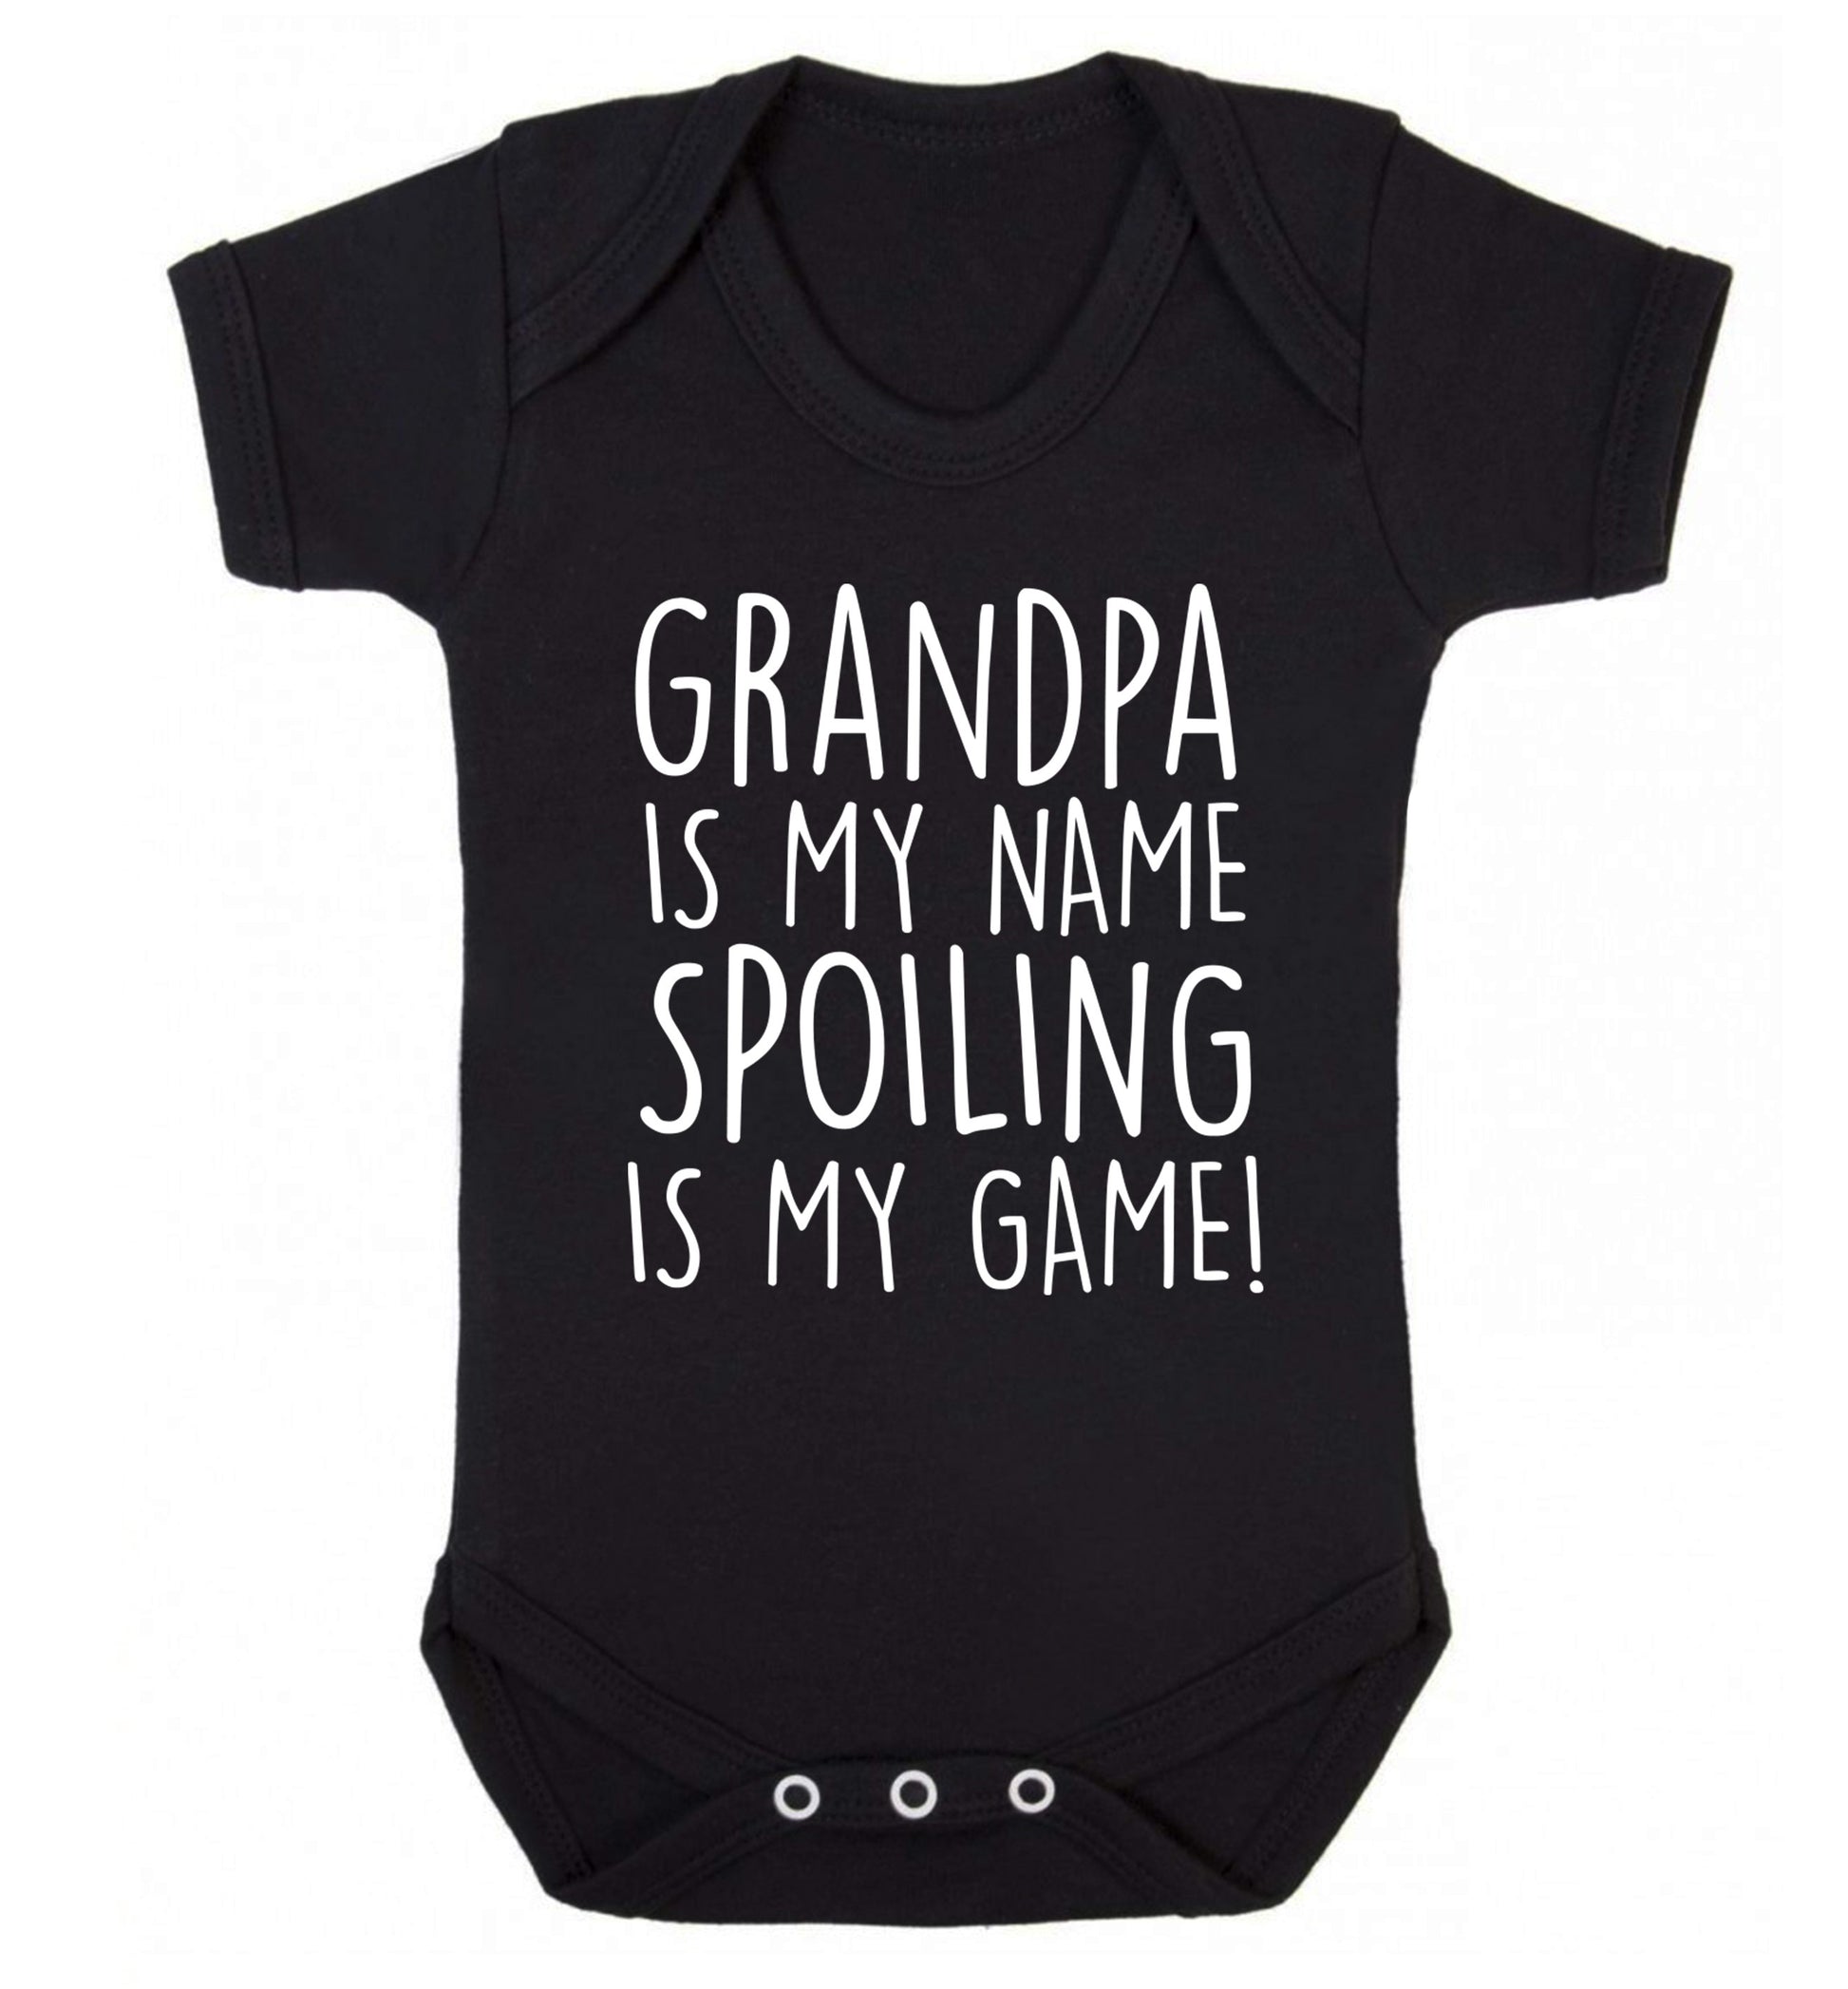 Grandpa is my name, spoiling is my game Baby Vest black 18-24 months